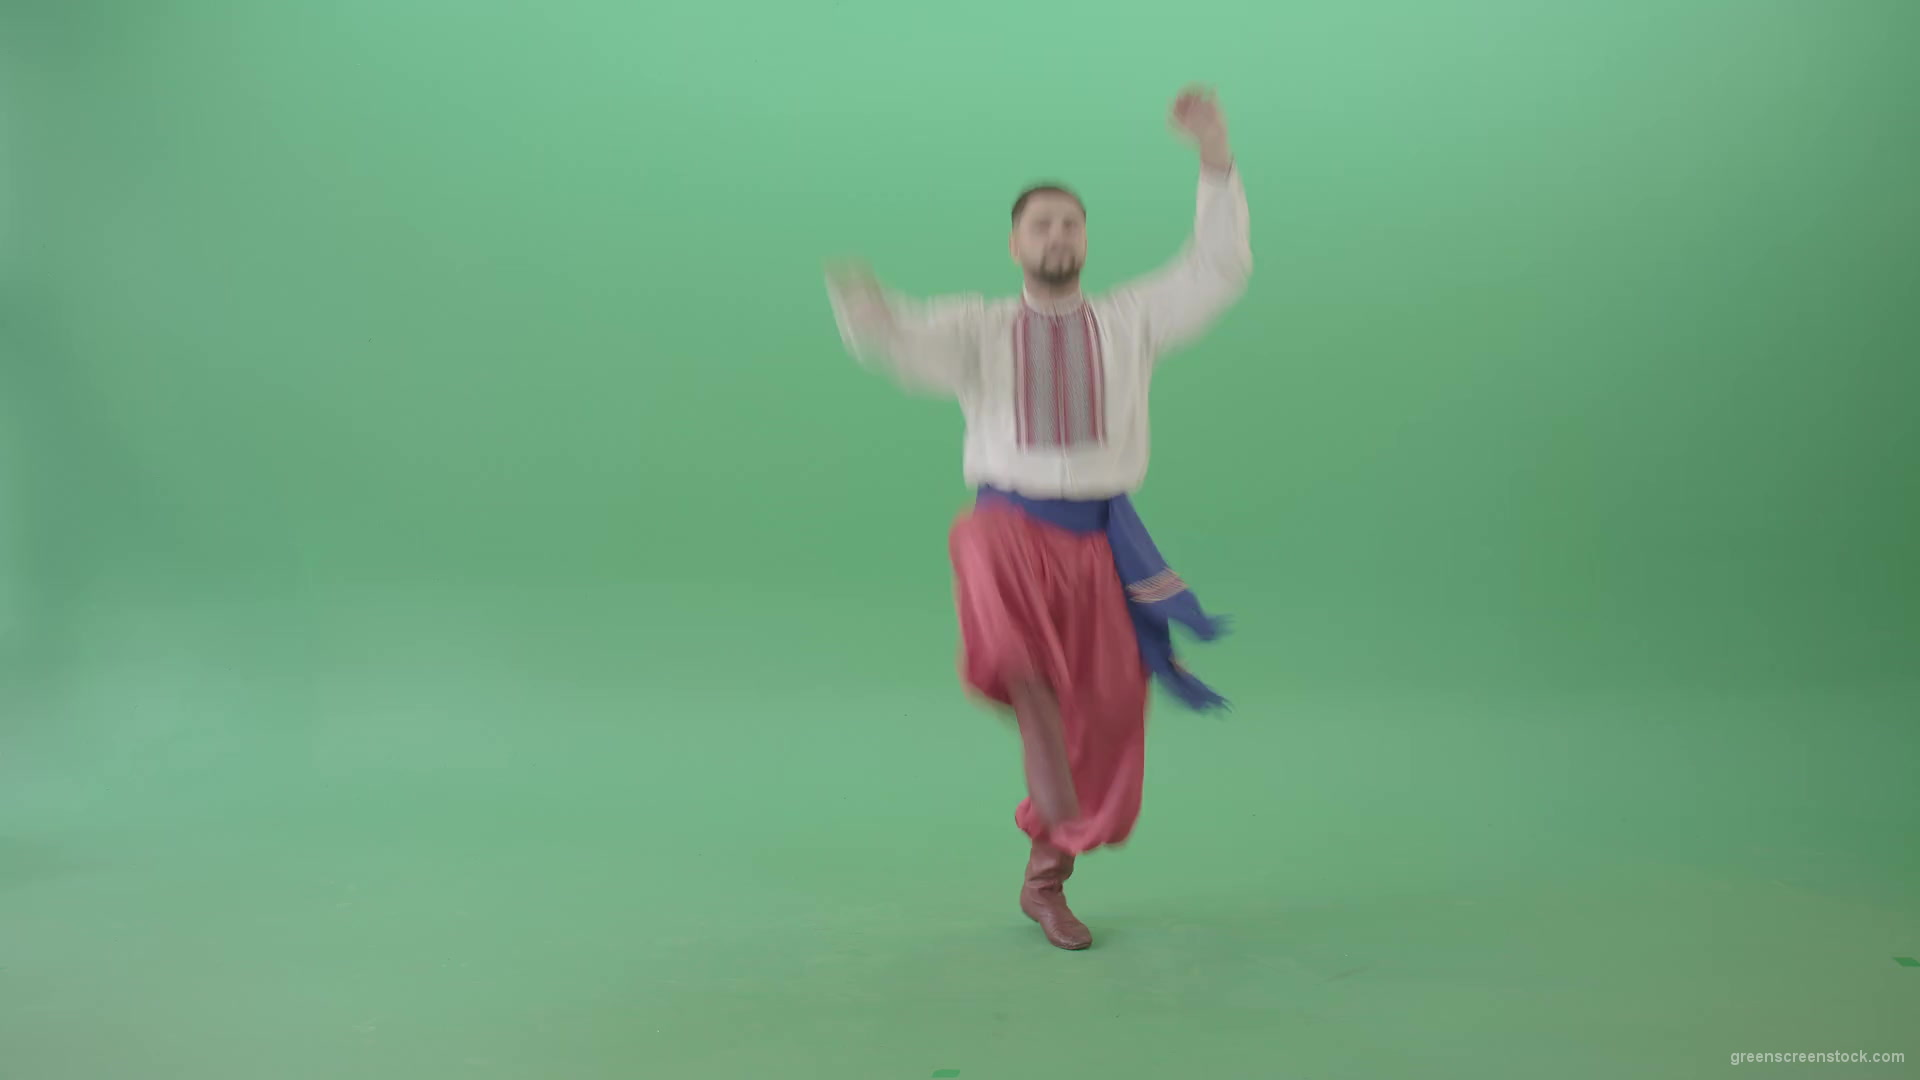 Slavic-Ukraine-folk-dance-by-UA-Cossack-man-jumping-isolated-on-Green-Background-4K-Video-Footage-1920_007 Green Screen Stock